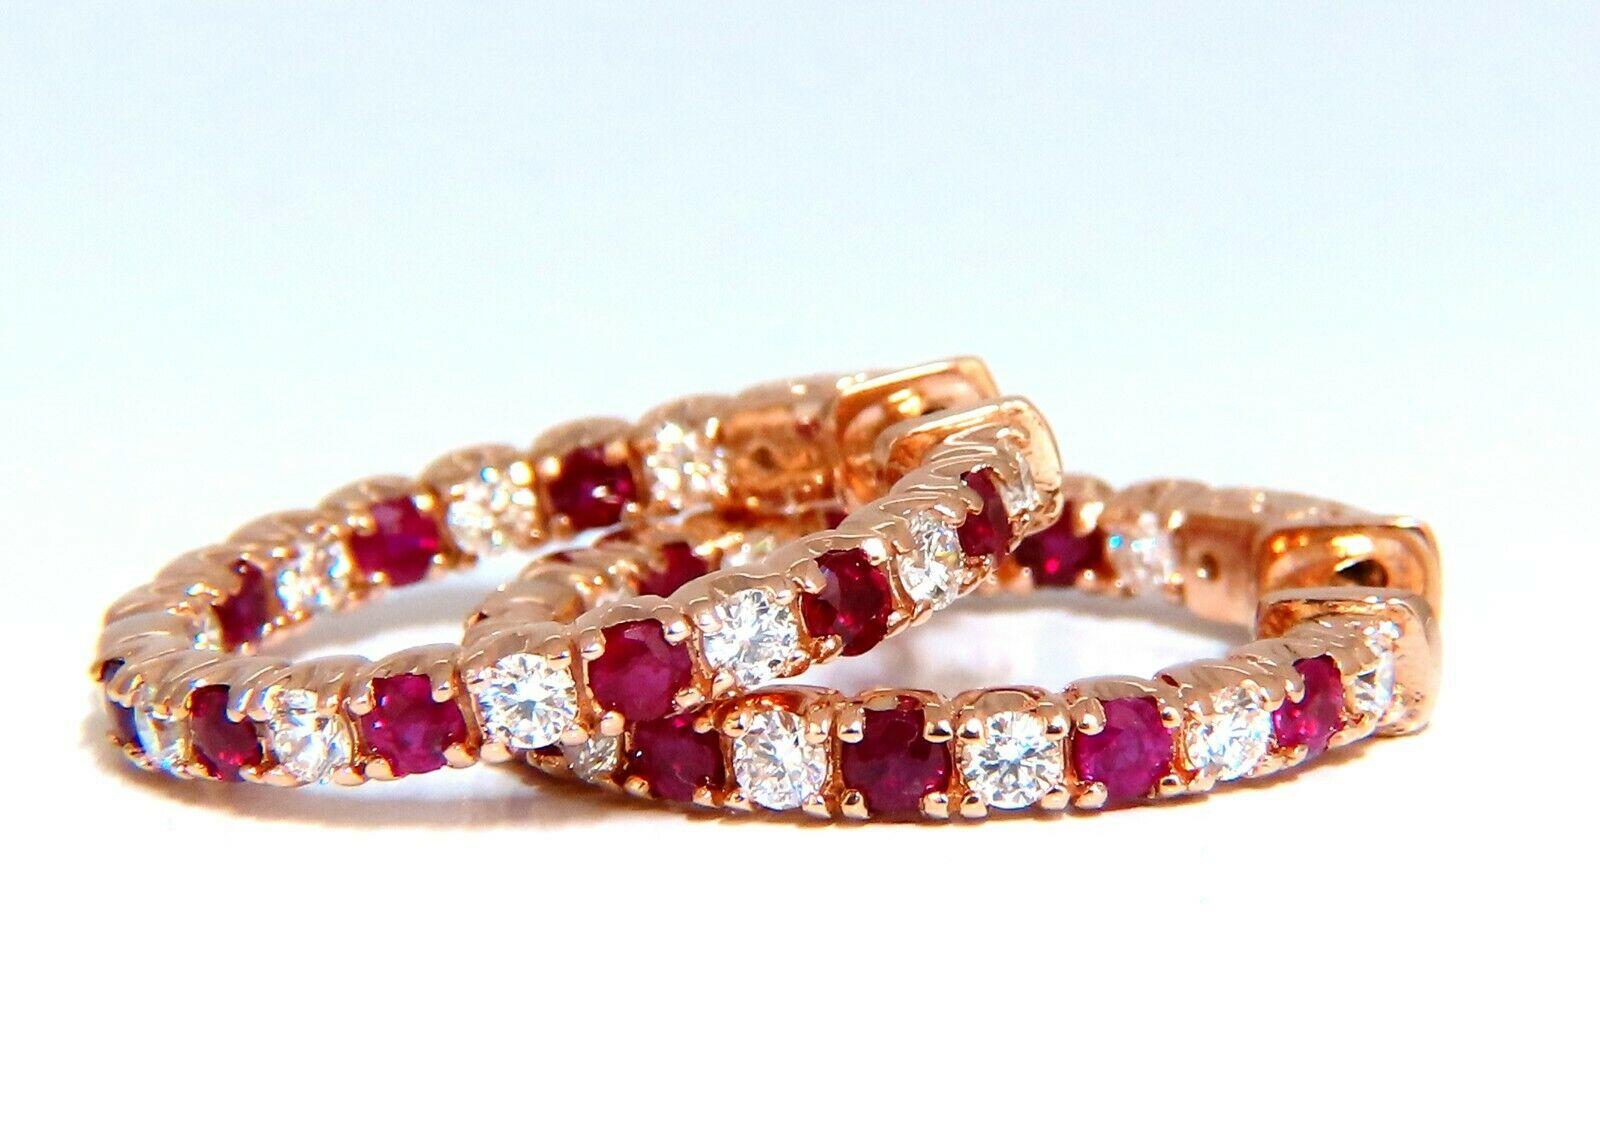 1.95ct Natural Ruby Diamonds Hoop Earrings 14kt Rose Gold Inside Out For Sale 1